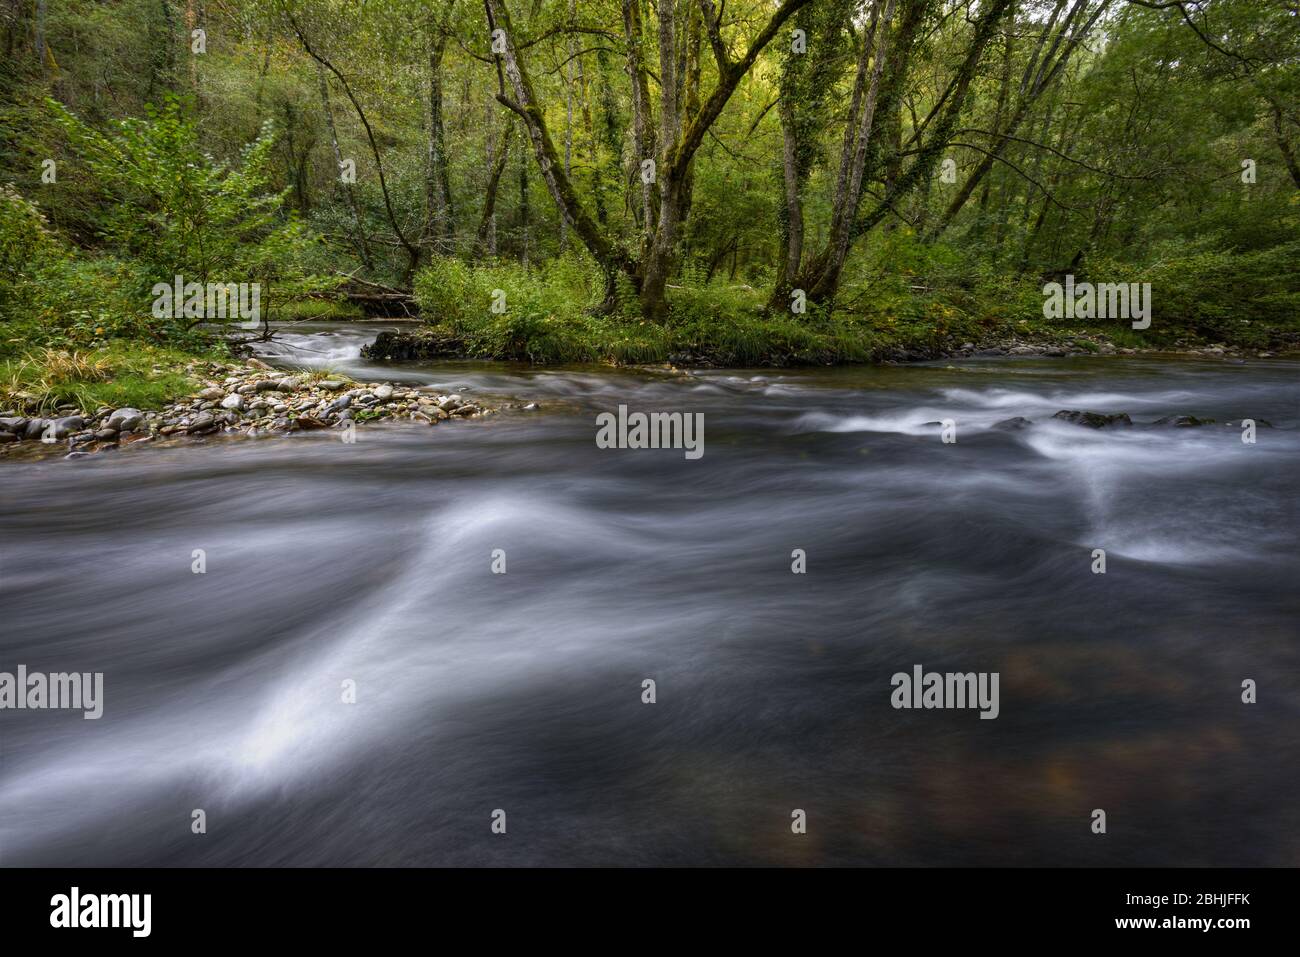 Wavy reflections in the Current of a River between deciduous forests in Navia de Suarna Stock Photo